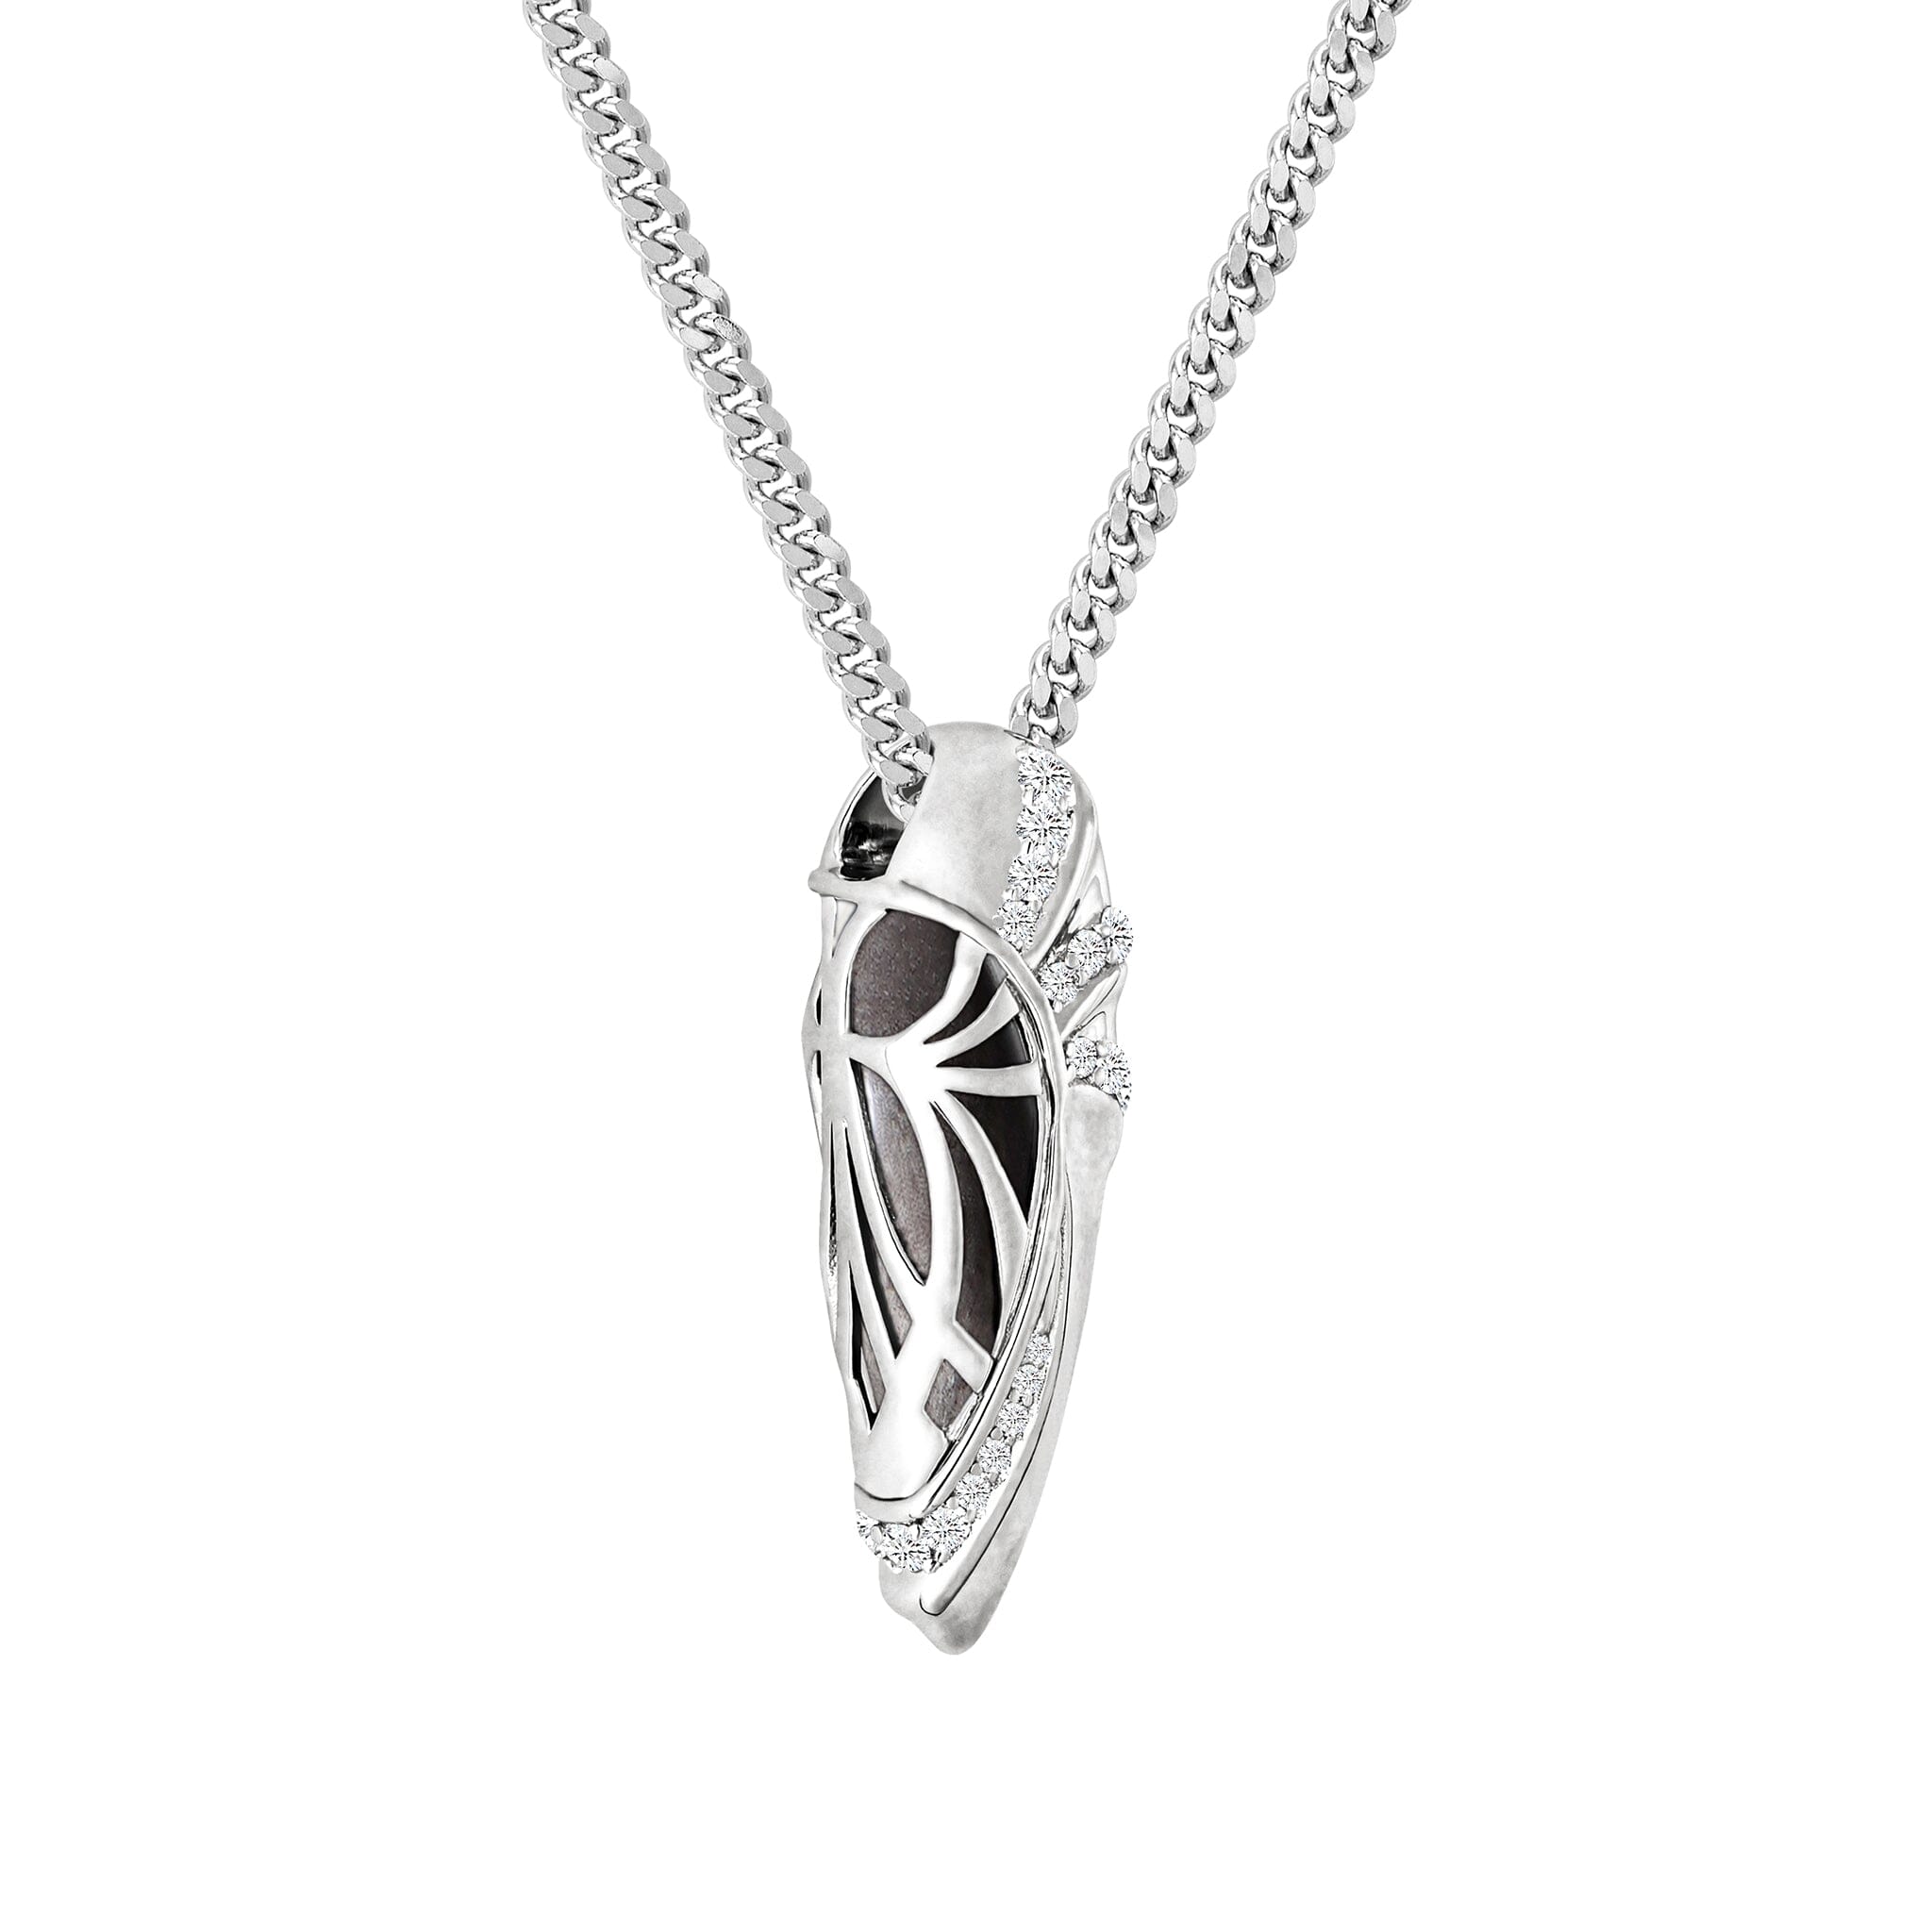 Women's Silver Time Capsule Necklace with Obsidian Necklaces WAA FASHION GROUP Refined Silver Chain Set - 55cm 